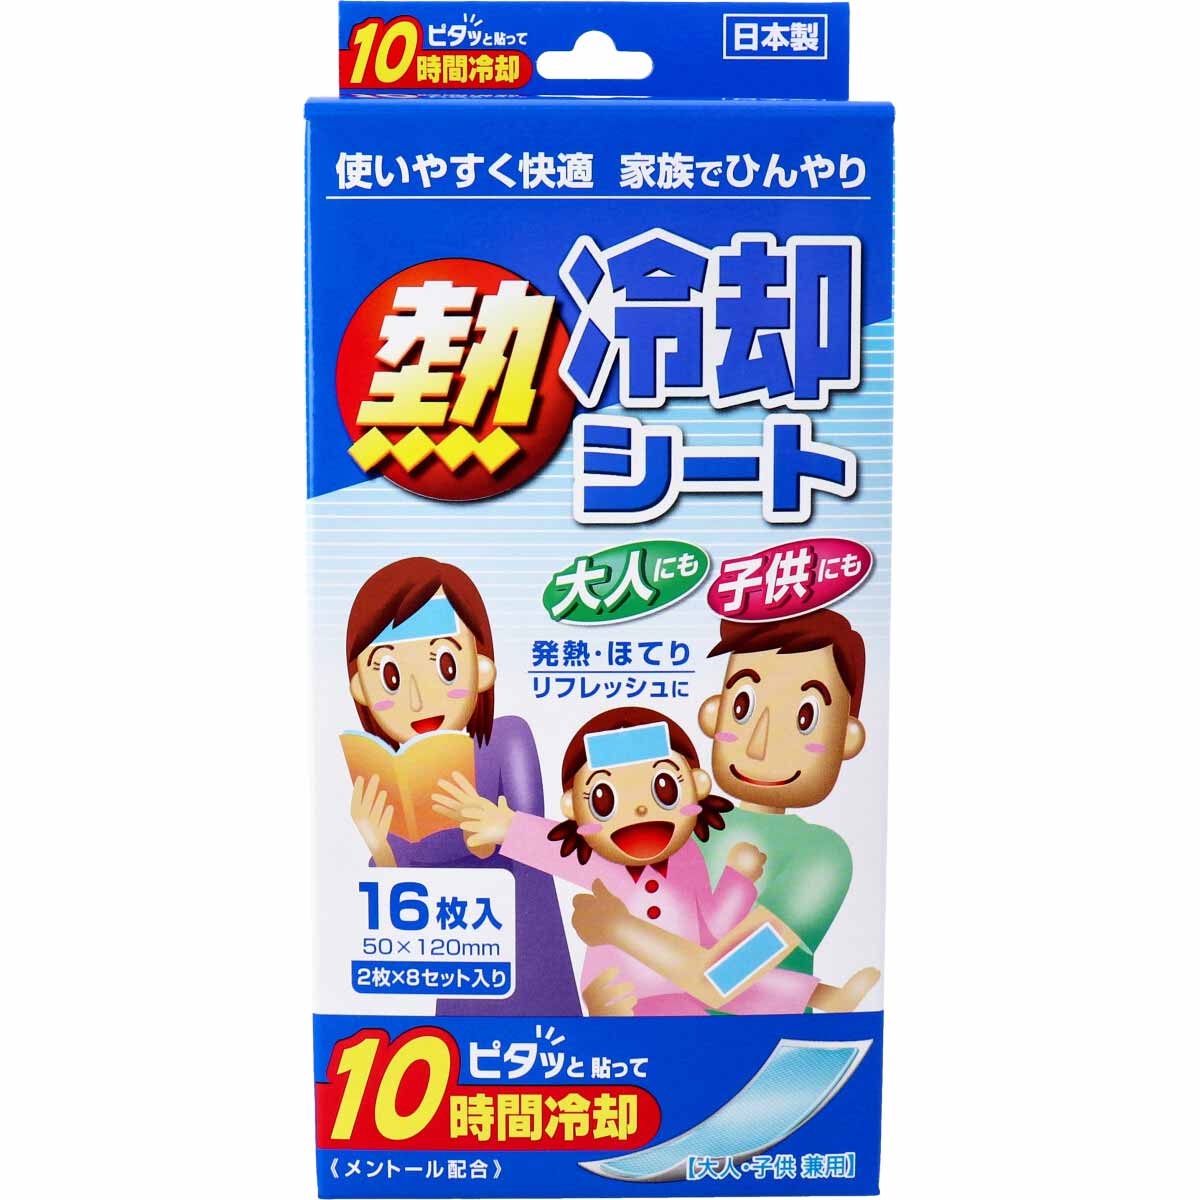 Picture of Cooling gel sheet for both adults and children